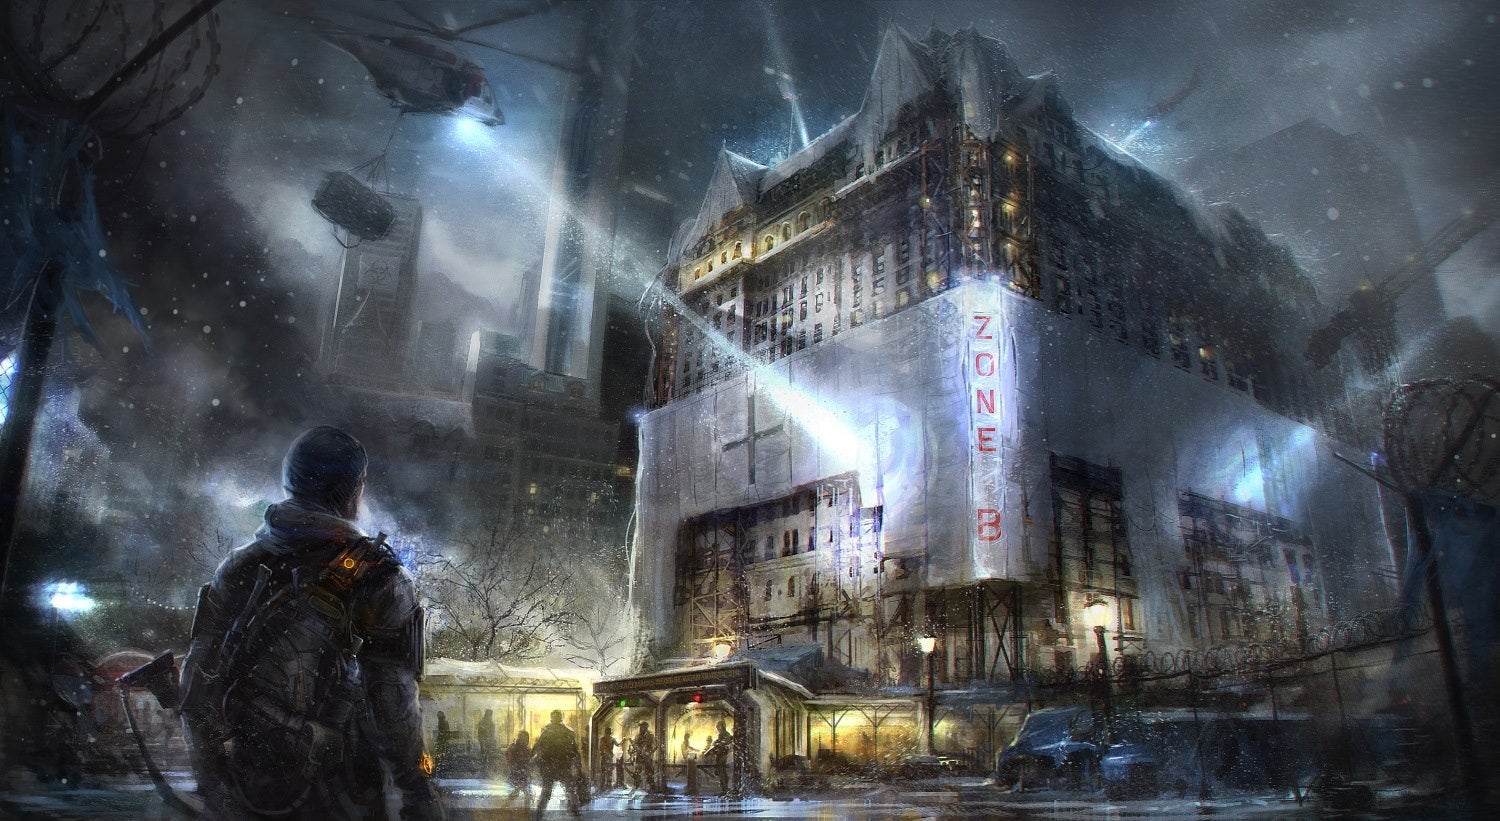 Image for The Division concept art shows fortified church base, new screen shows Snowdrop engine effects